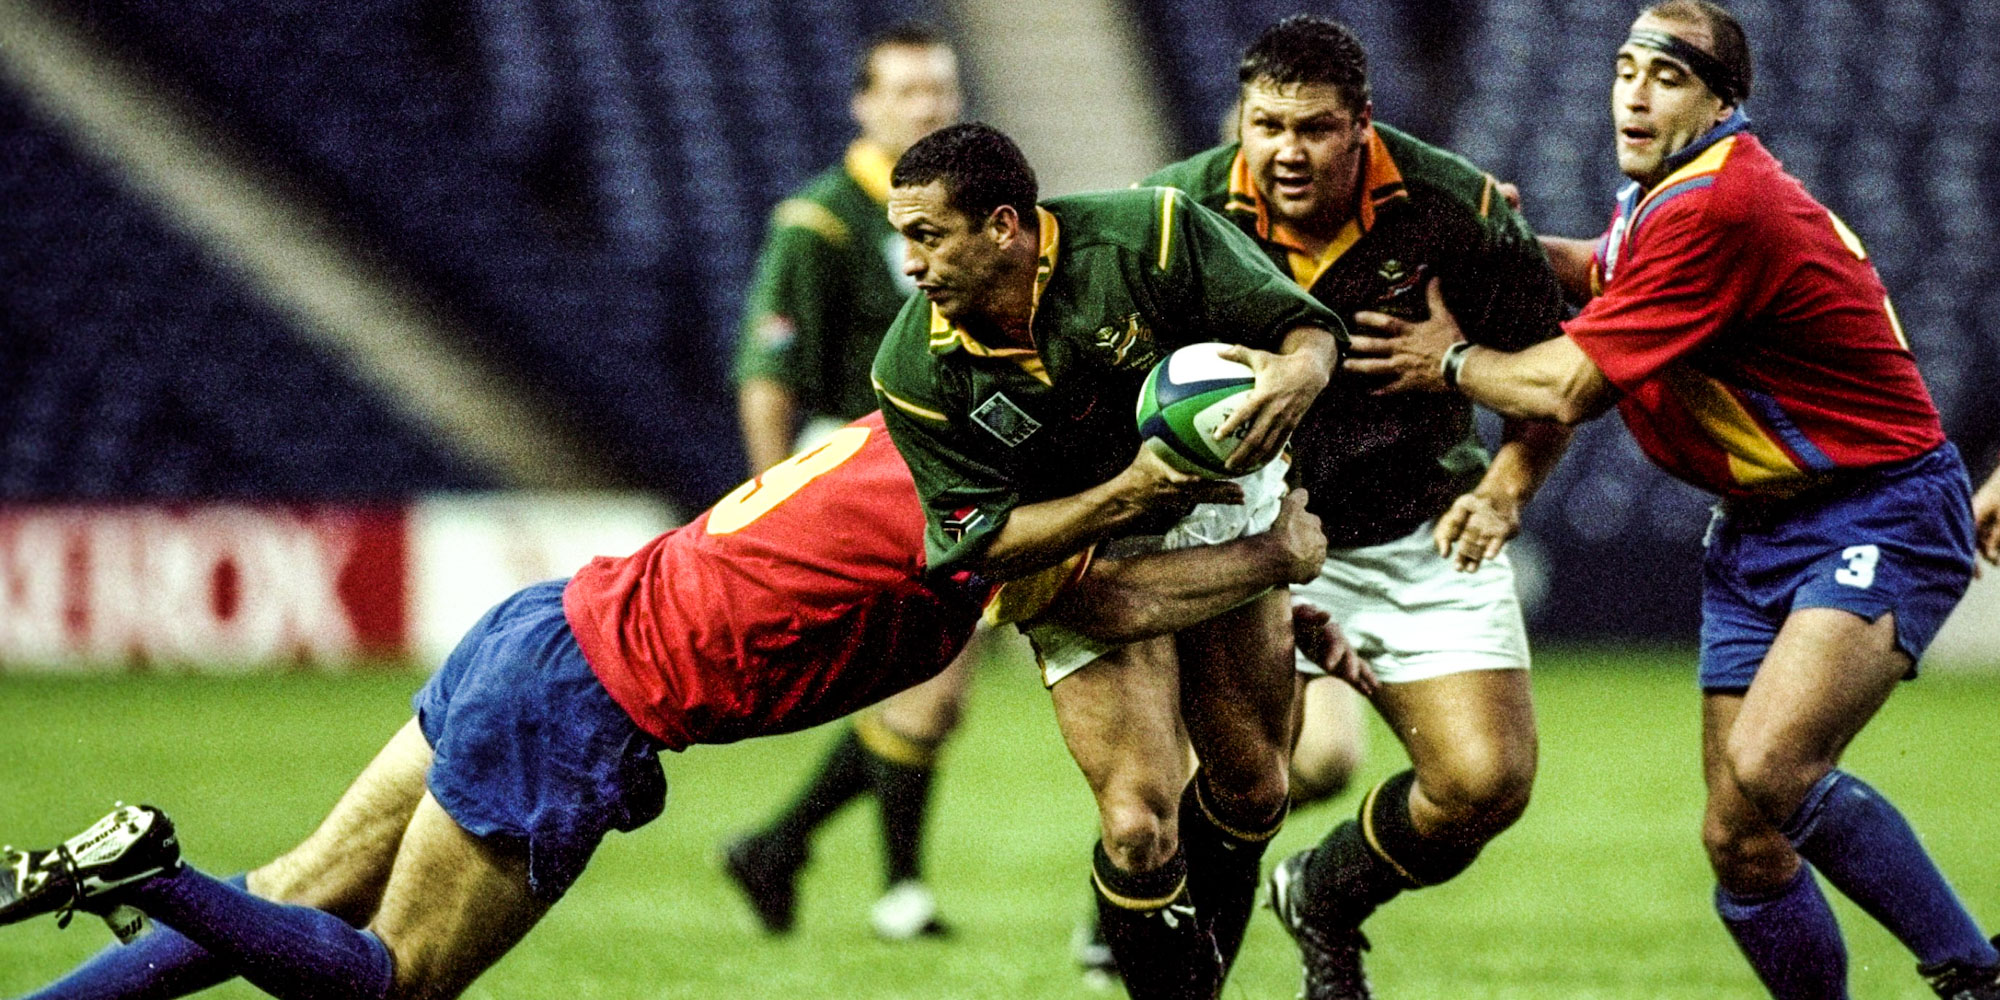 Werner Swanepoel scored one of the Boks' tries the last time they faced Spain, at the RWC in 1999.